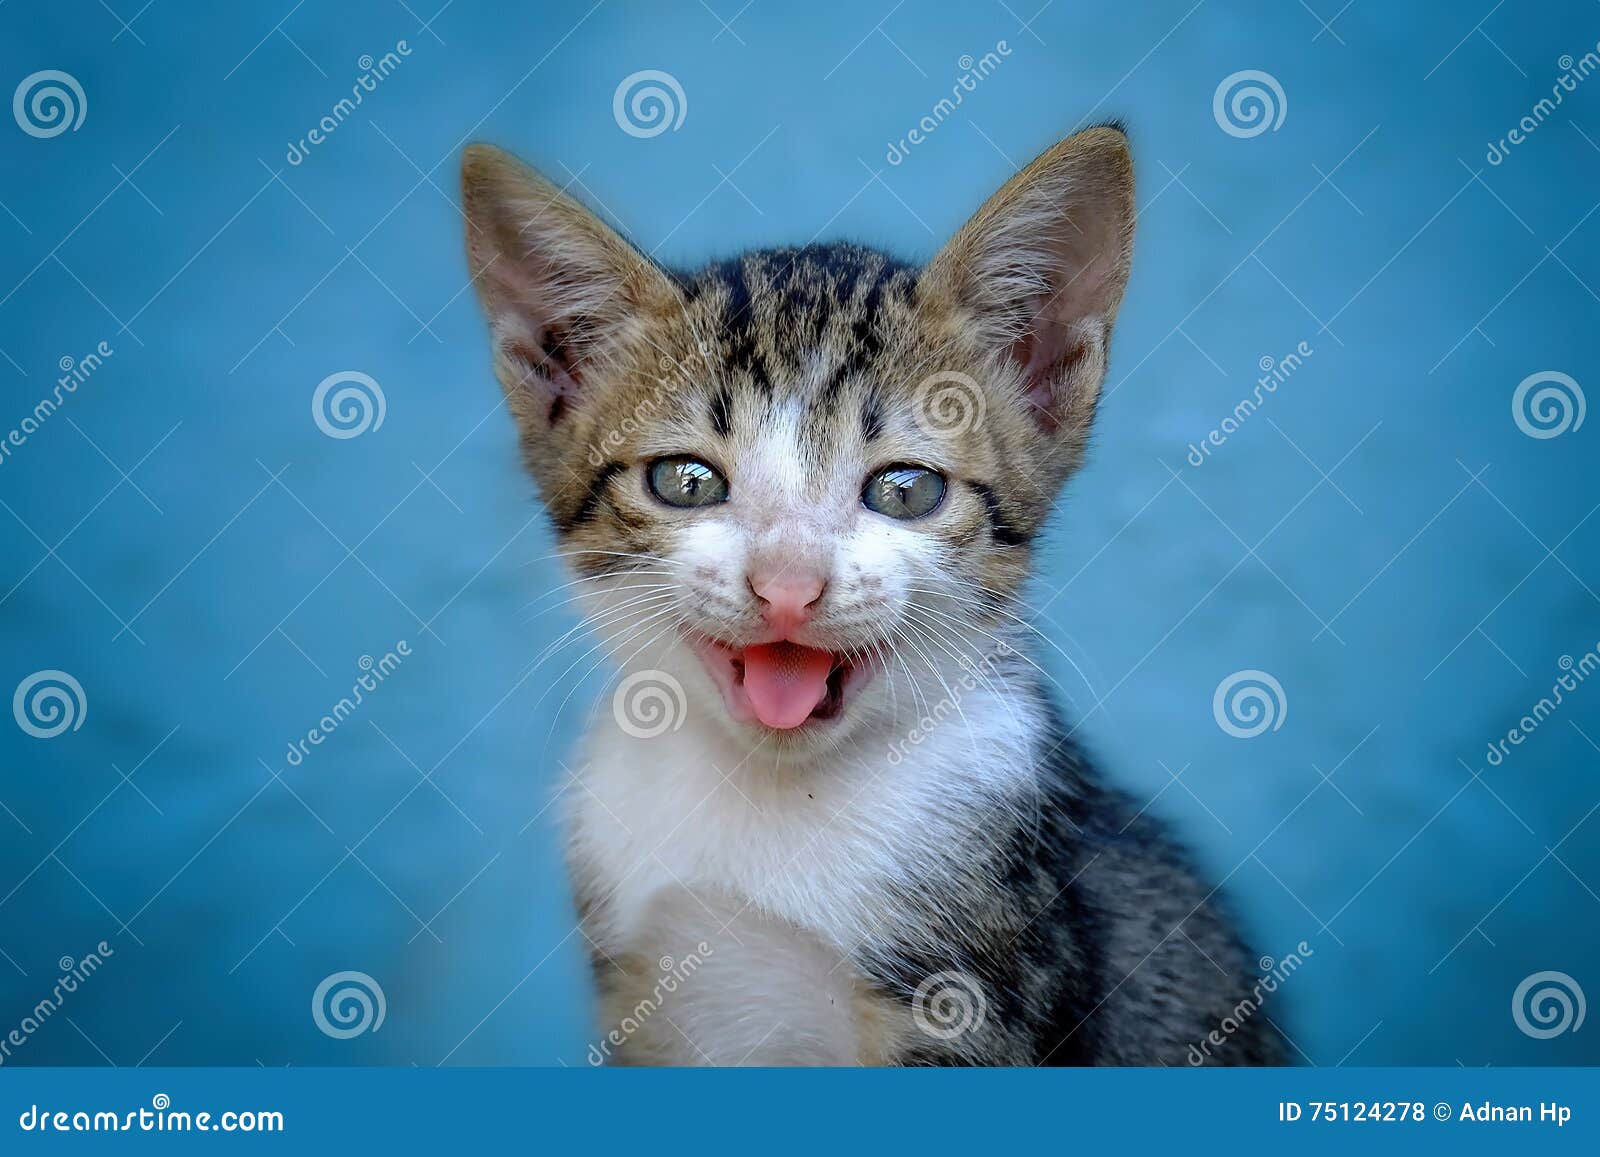 cat with smiling face and cute expresion